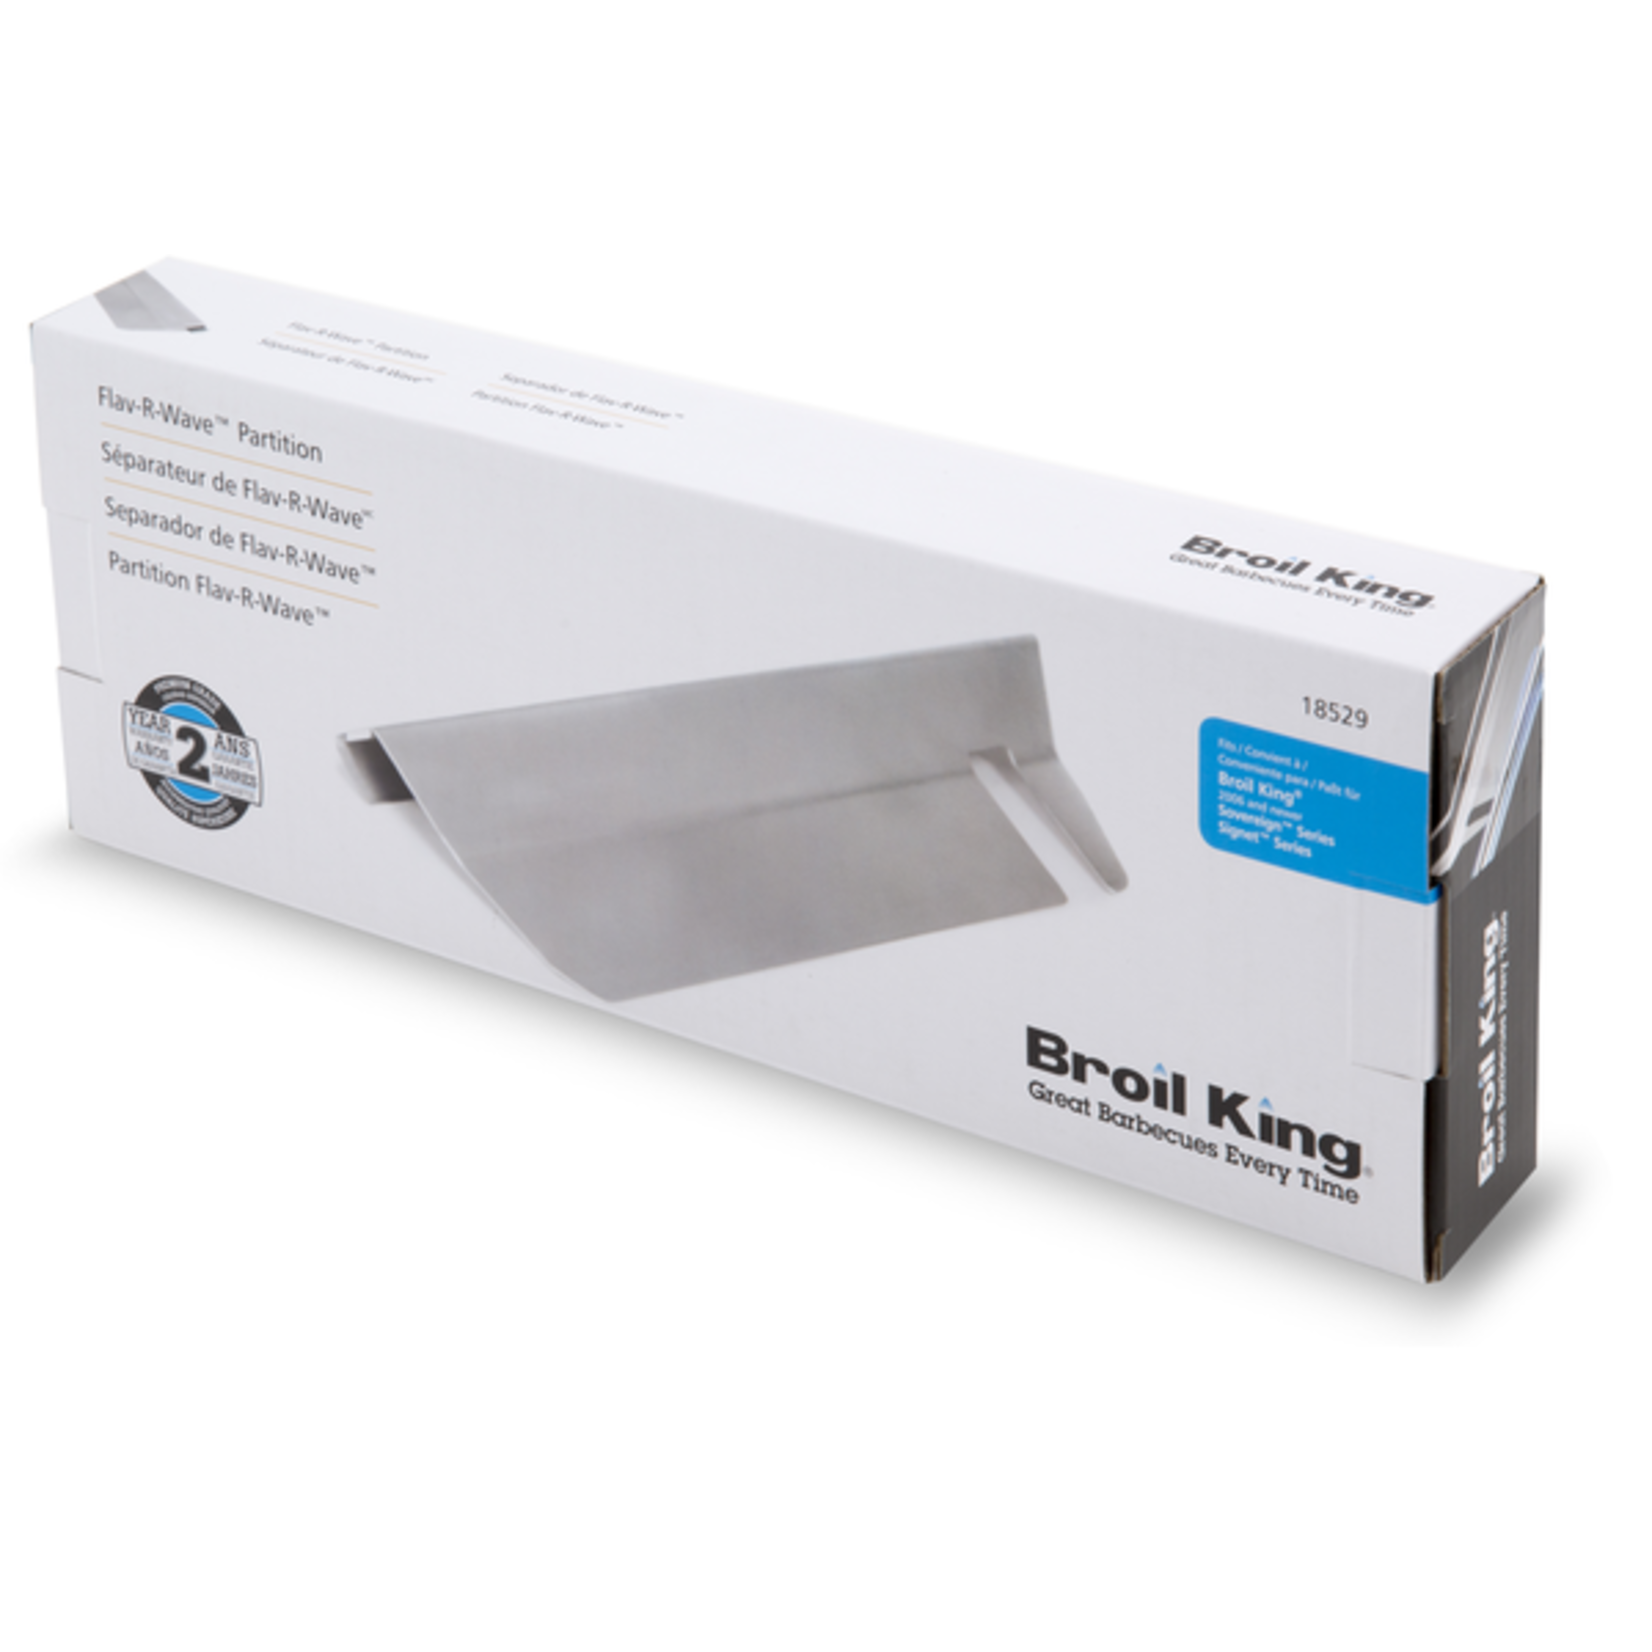 Broil King Divider - Signet/Sovereign - Stainless Steel - 1 Piece